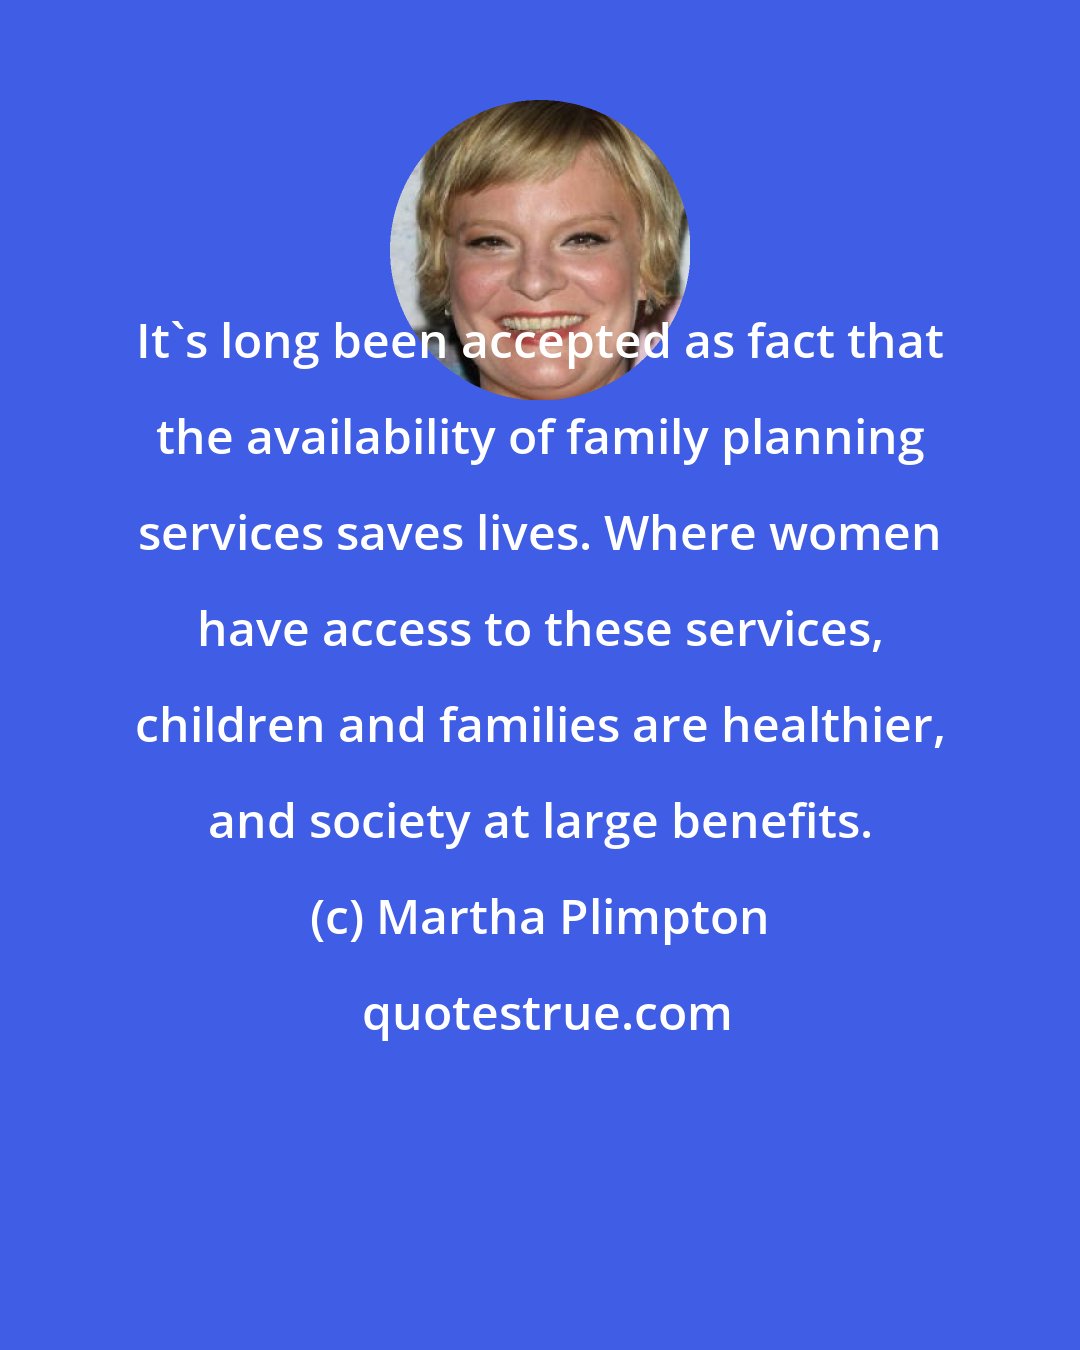 Martha Plimpton: It's long been accepted as fact that the availability of family planning services saves lives. Where women have access to these services, children and families are healthier, and society at large benefits.